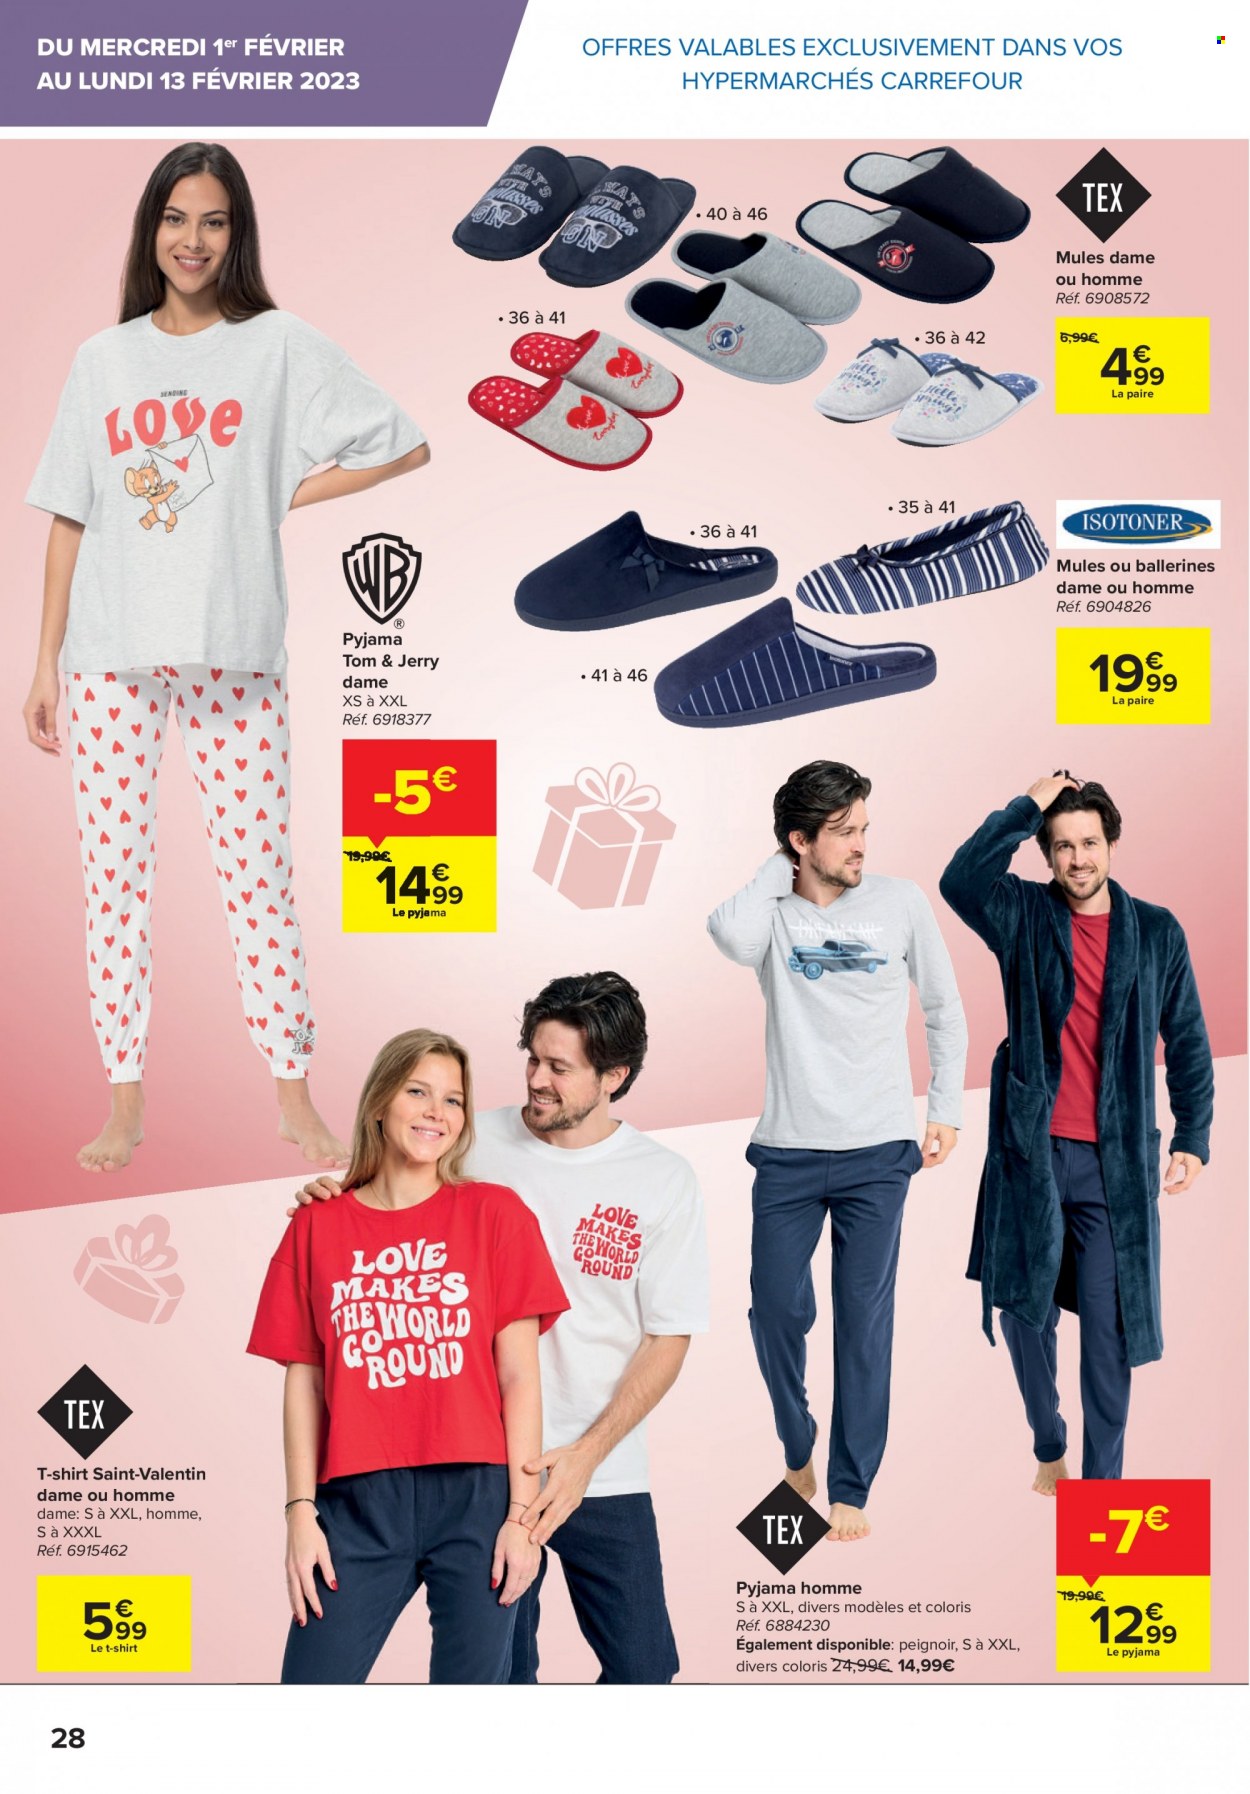 Catalogue Carrefour hypermarkt - 1.2.2023 - 13.2.2023. Page 28.